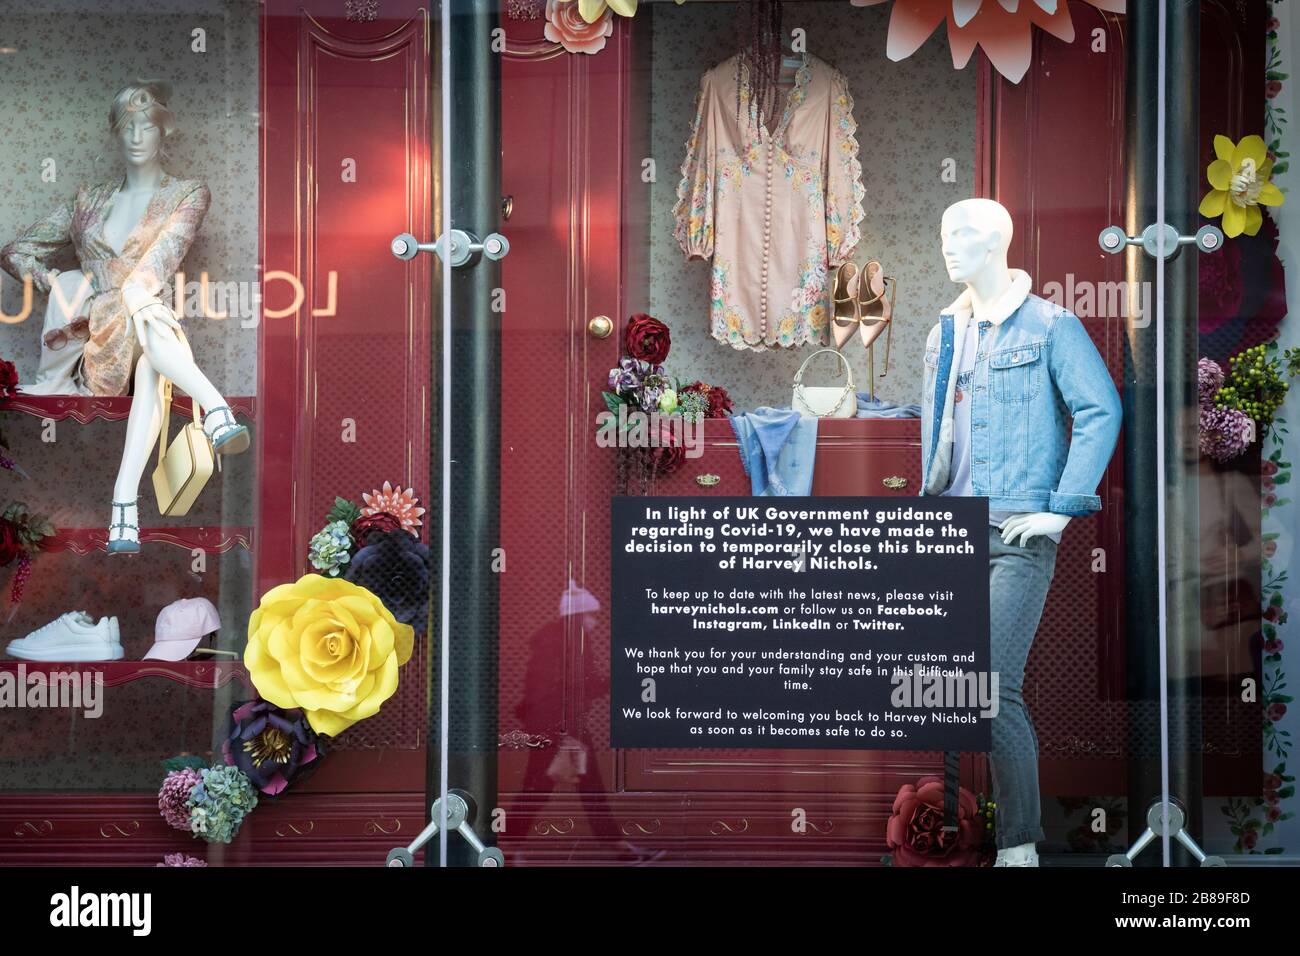 Manchester, UK. 20 March, 2020. A sign explaining the recent suspension of trade due to coronavirus is displayed in the window of the prestigious retailer Harvey Nichols. Credit: Andy Barton/Alamy Live News Stock Photo